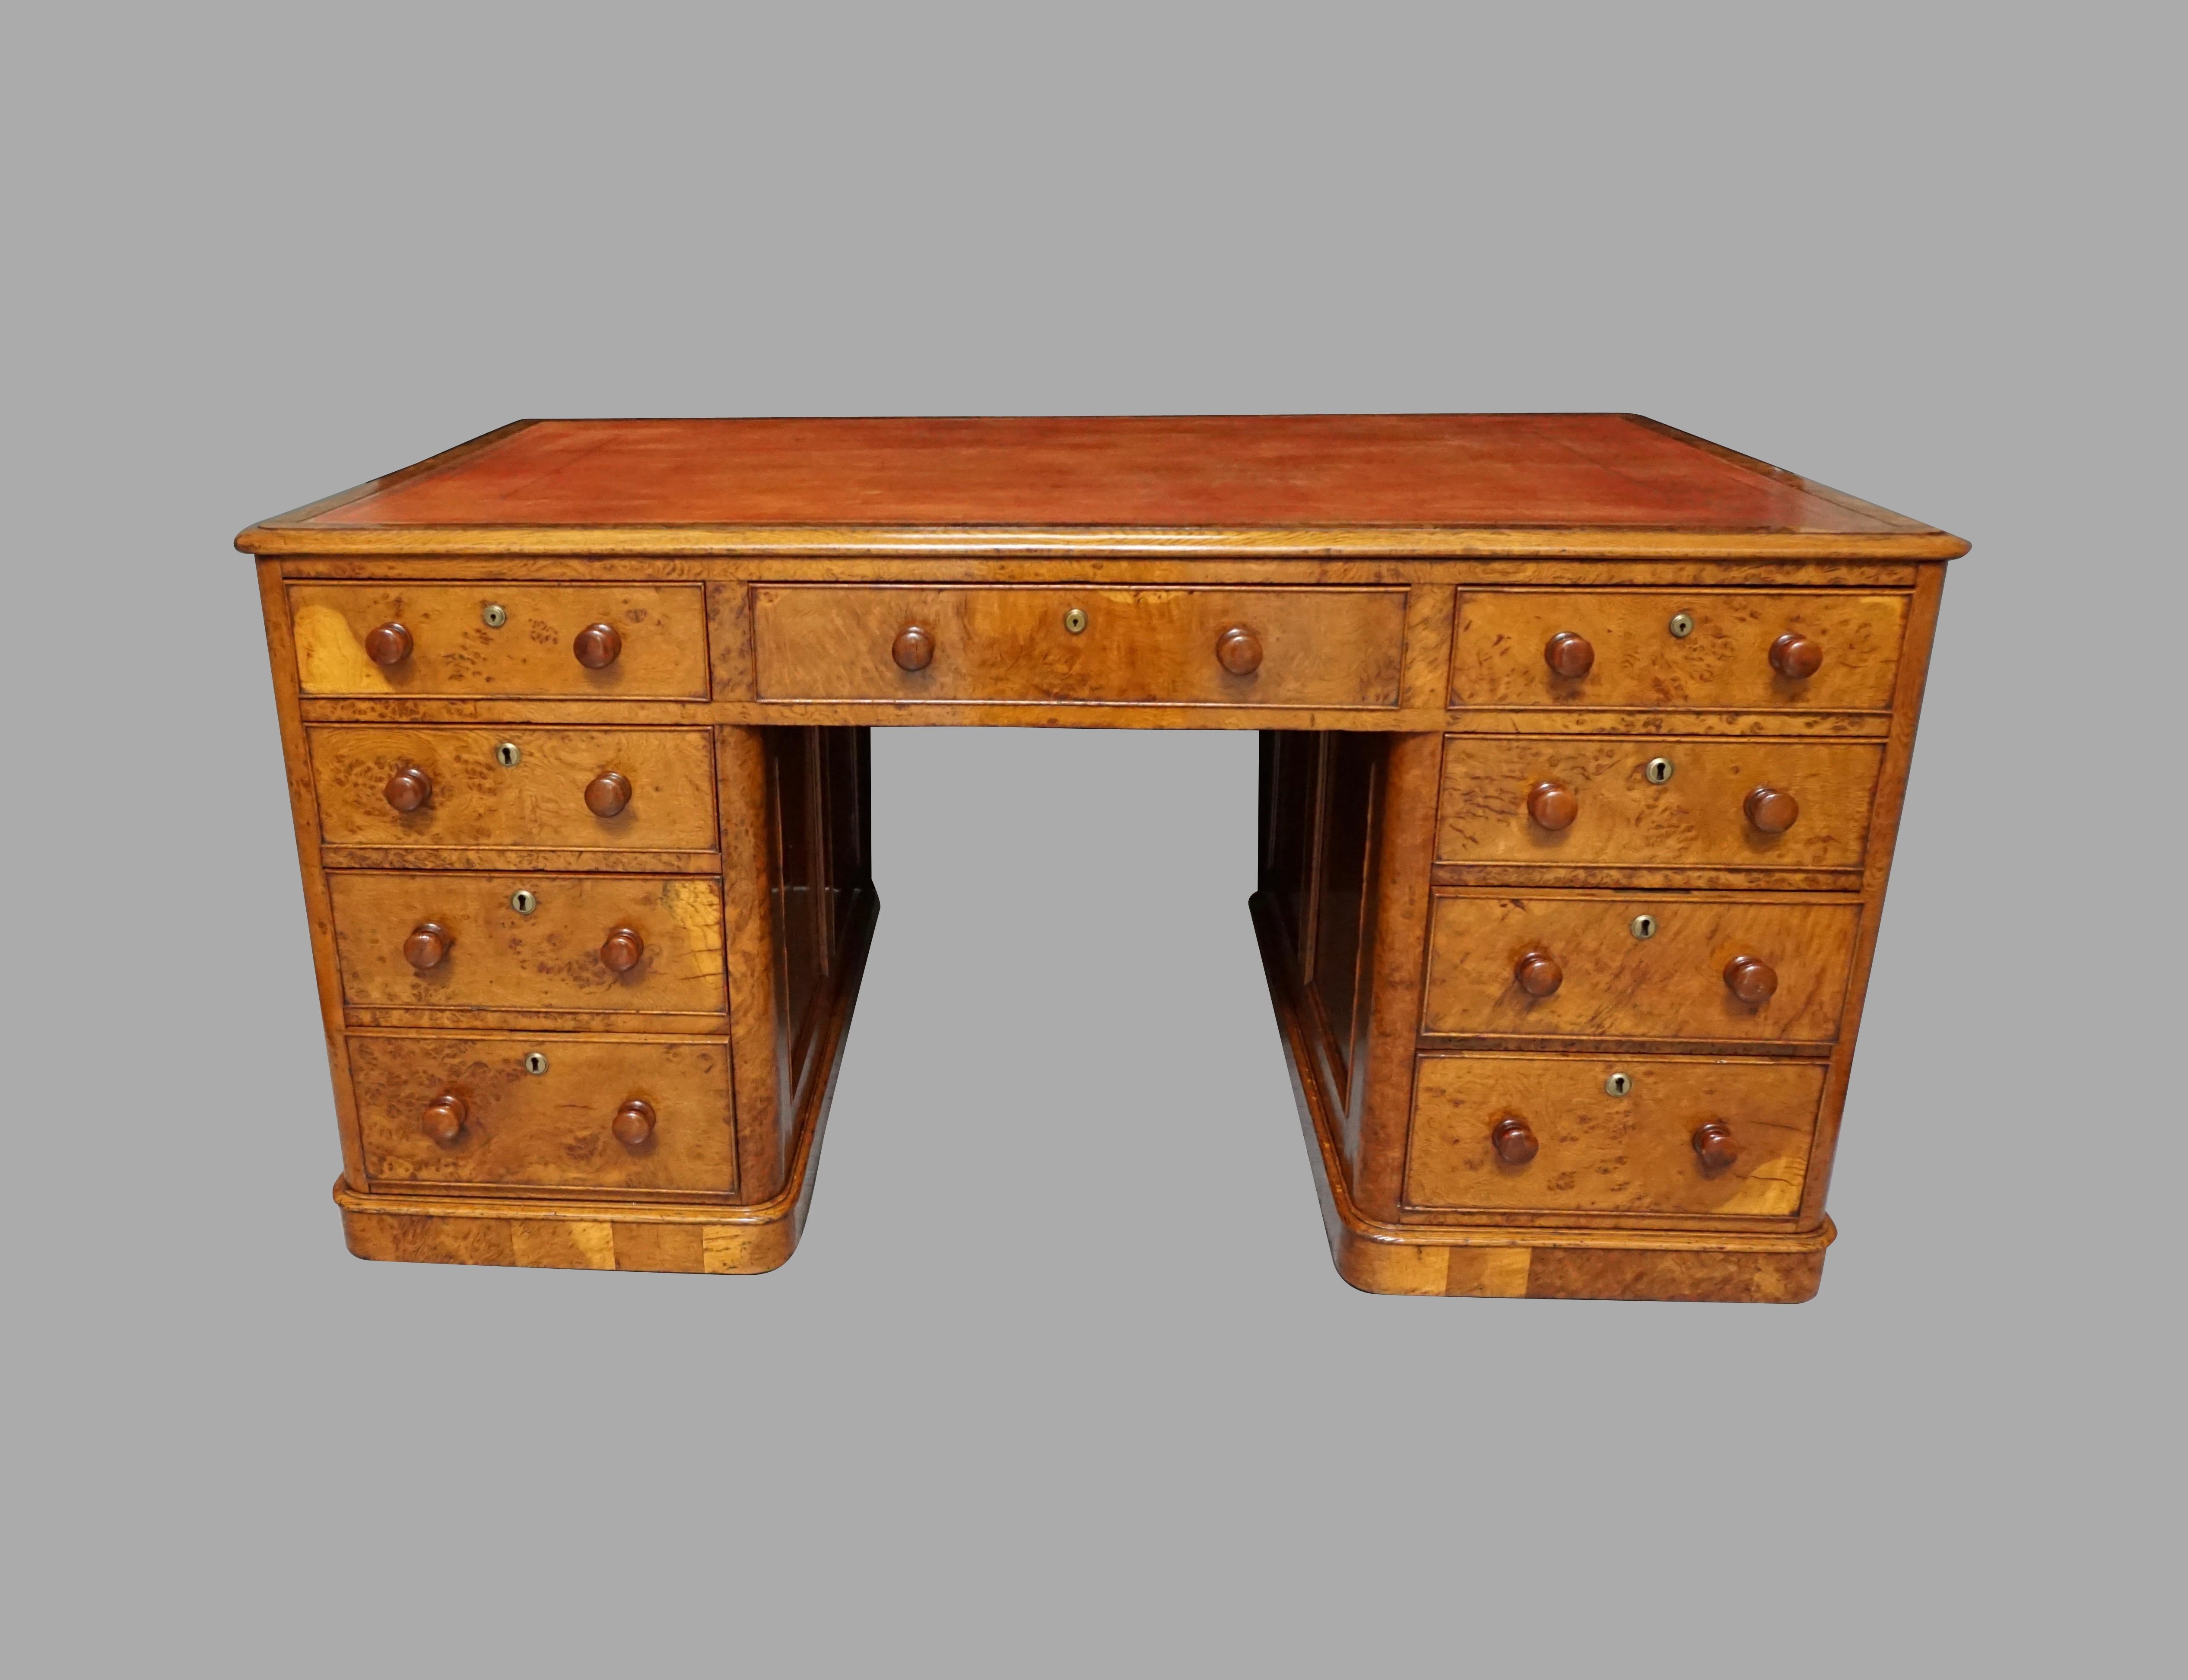 Georgian Rare Pollard Oak Partners Desk in the Manner of Gillows with Tooled Leather Top